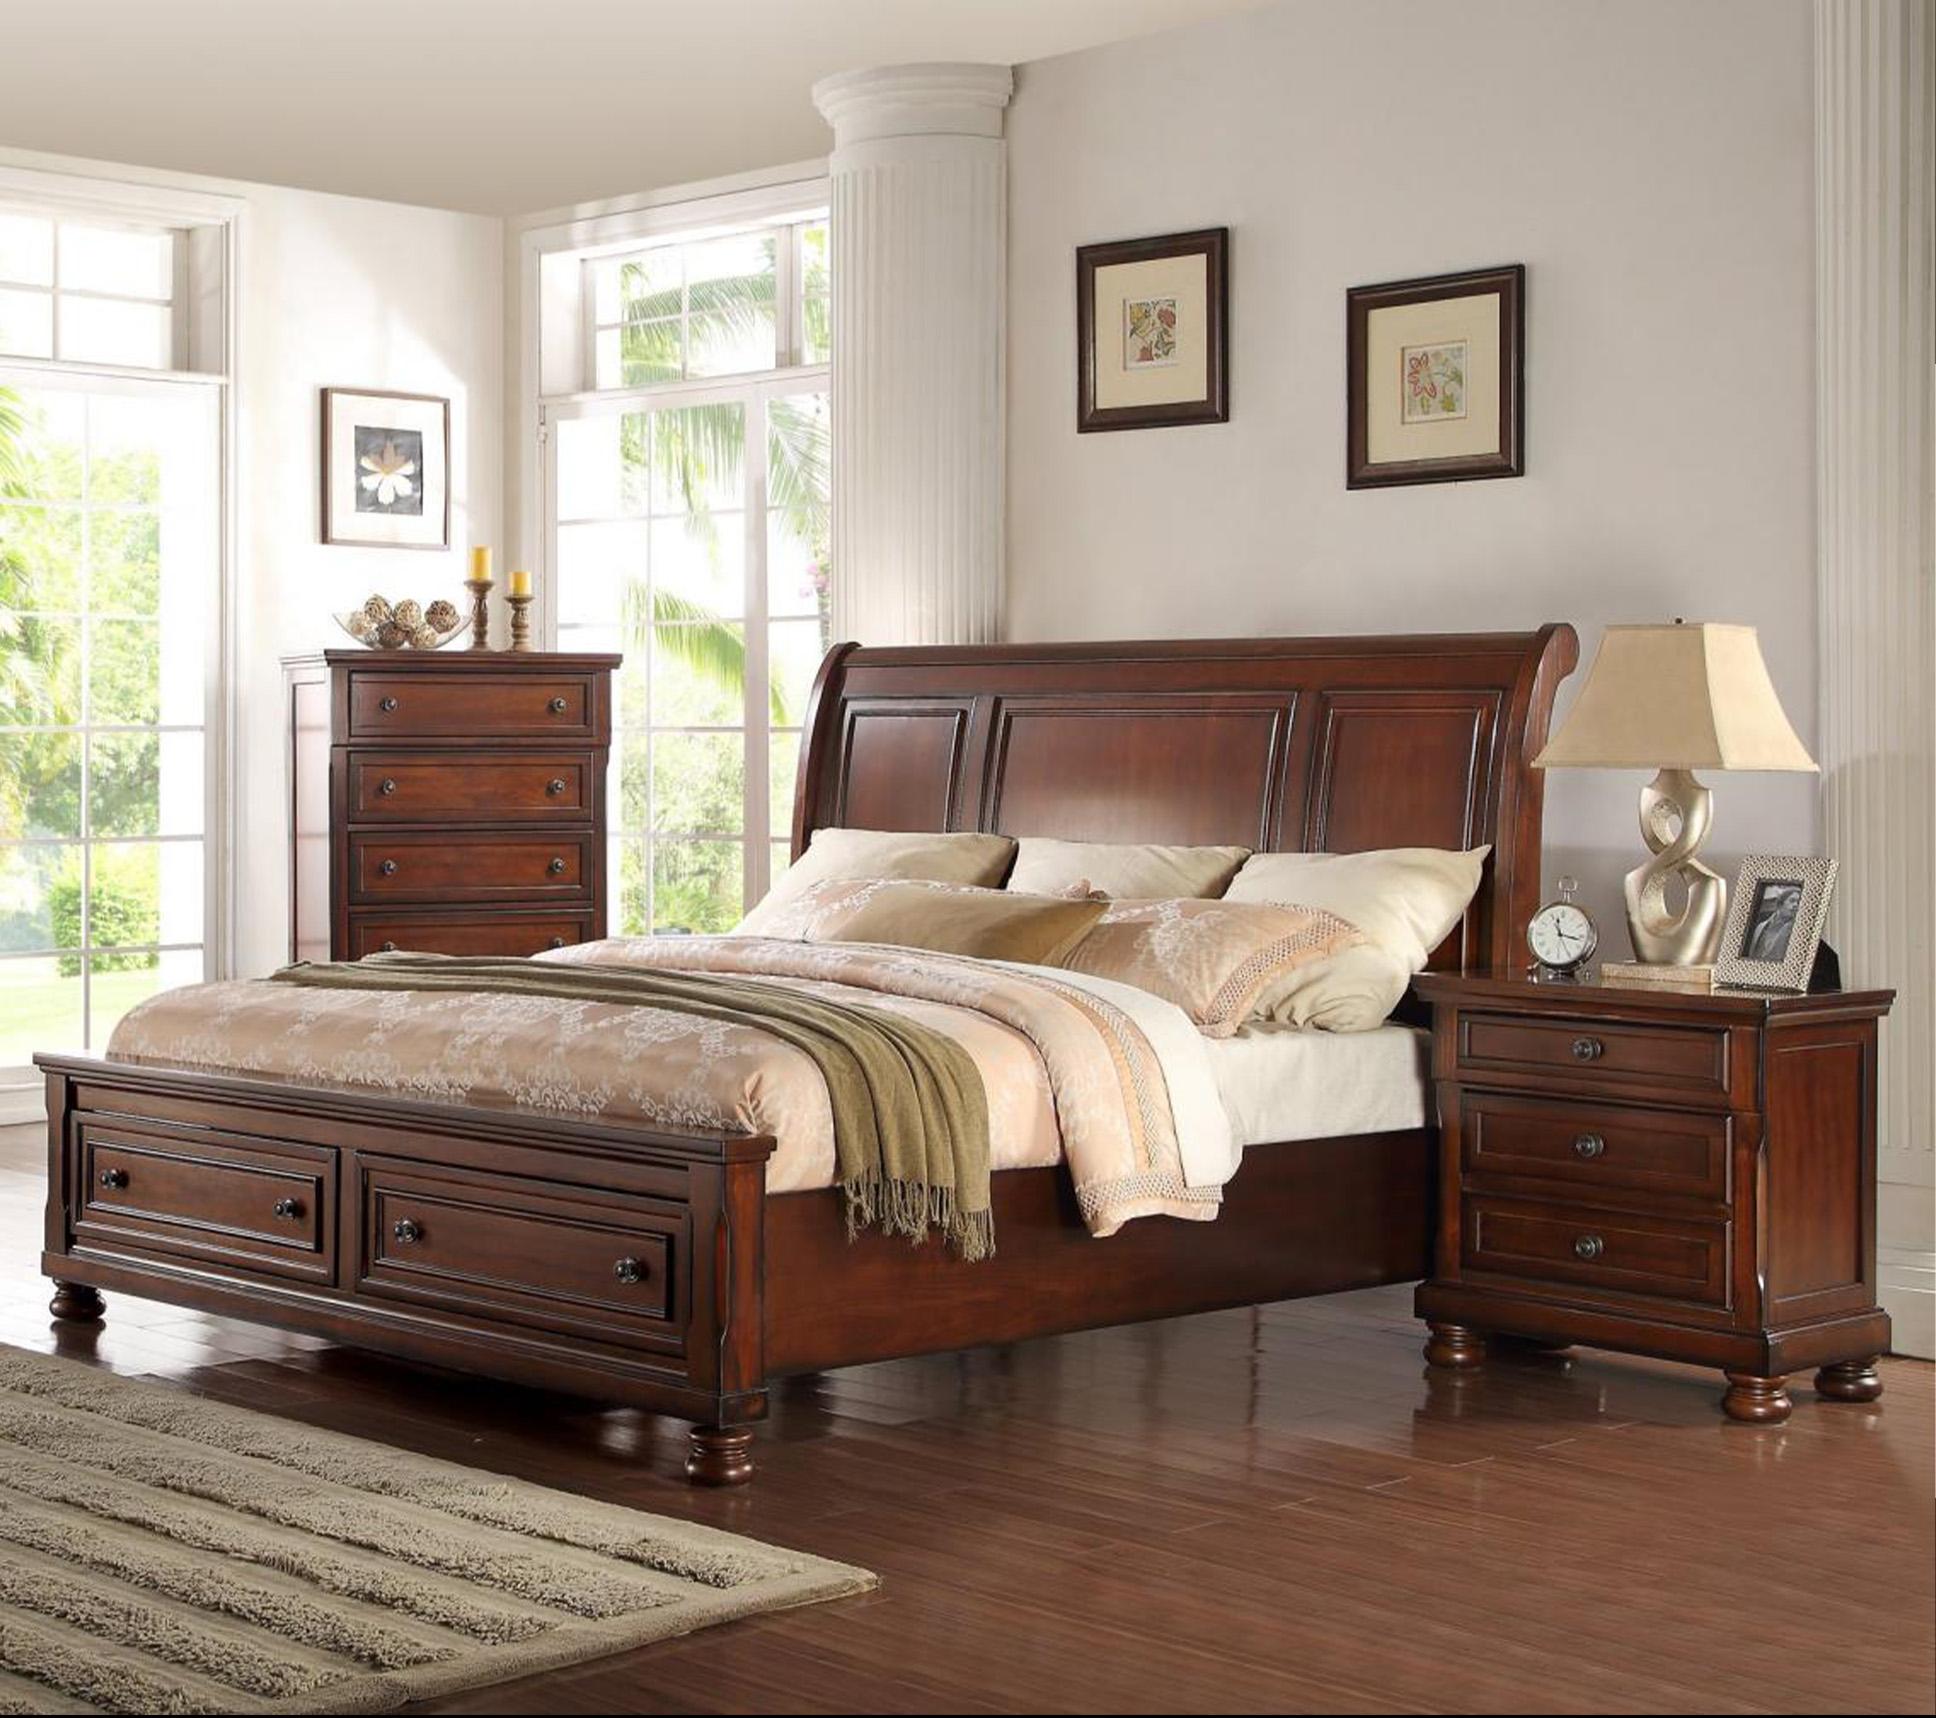 

    
Cherry Solid Wood CAL King Storage Bedroom Set 5Pcs w/Chest Traditional McFerran B608
